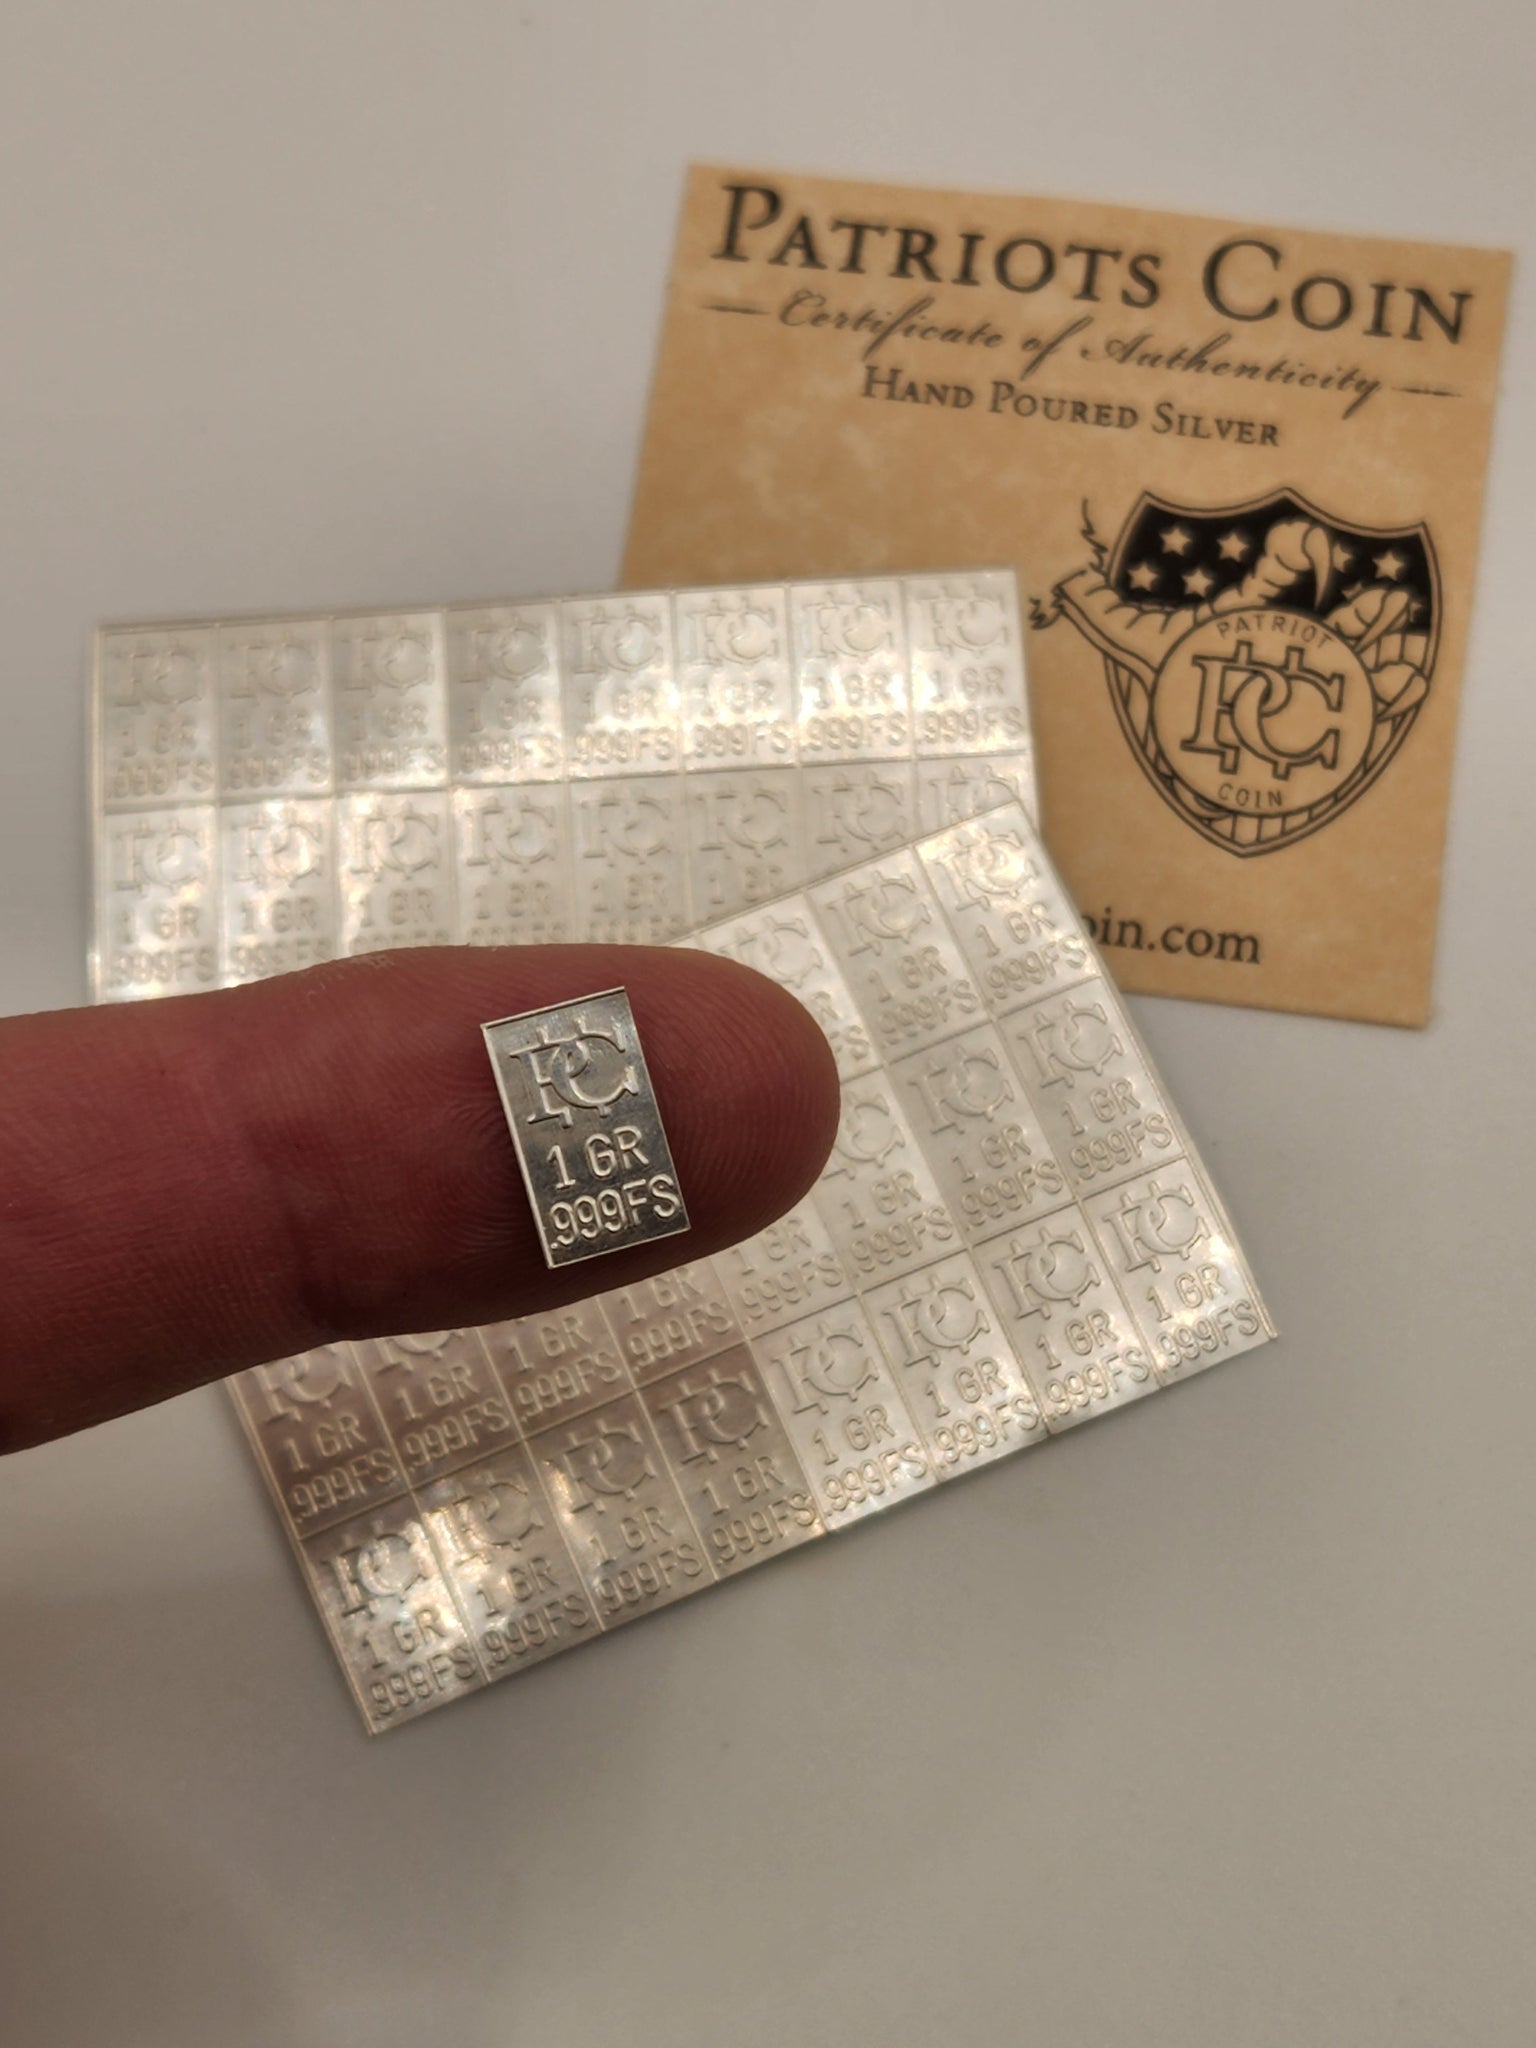  10 One Gram Pure Silver Bullion Bar Divides to 15 One Grain  Bars .999 Fine Silver Snaps Apart to Individual 1 Grain Ingots : ספורט  ופעילות בחיק הטבע